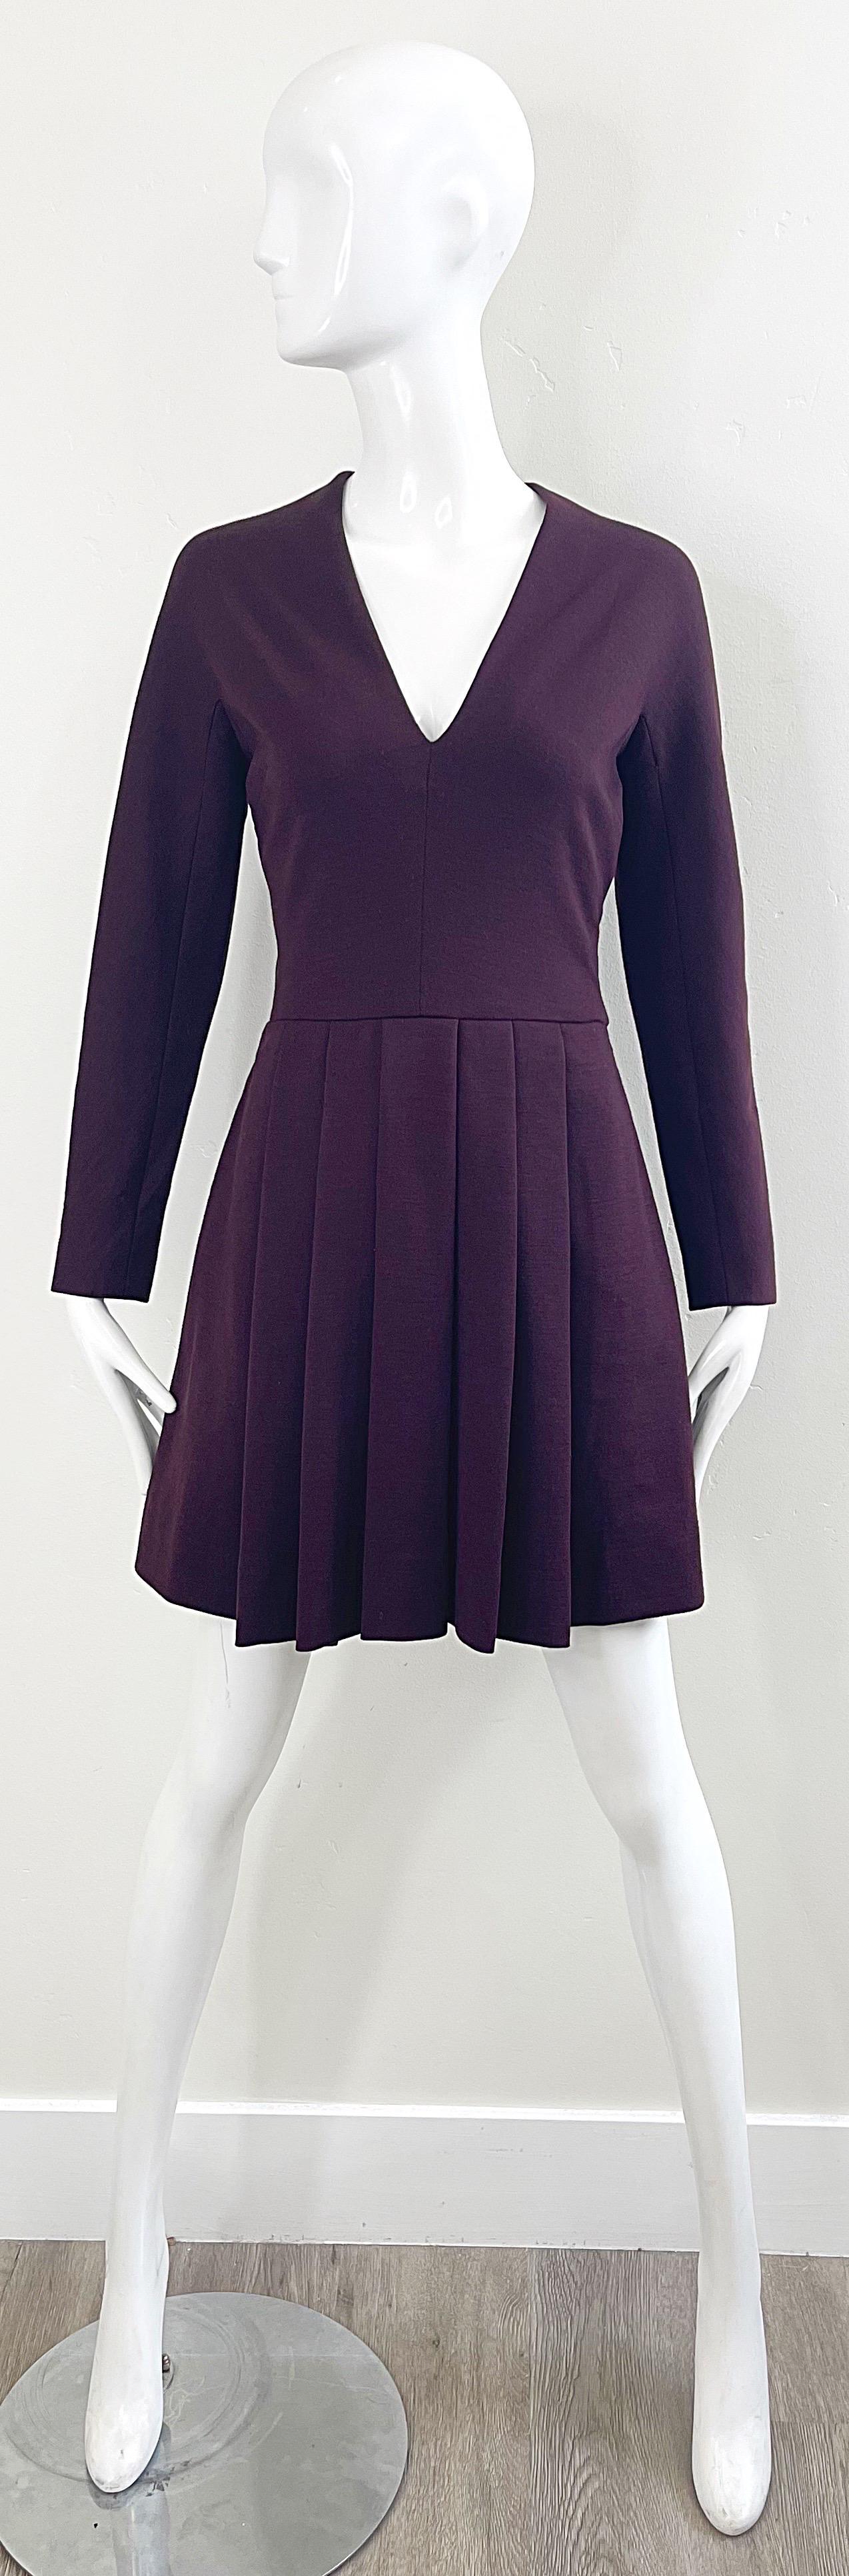 Chic 1970s PAULINE TRIGERE burgundy / maroon long sleeve wool mini dress ! Features a tailored v neck bodice with knife pleat skirt. Hidden zipper up the back with hook-and-eye closure. Perfect for any day or evening event. Pair with flats, heels or